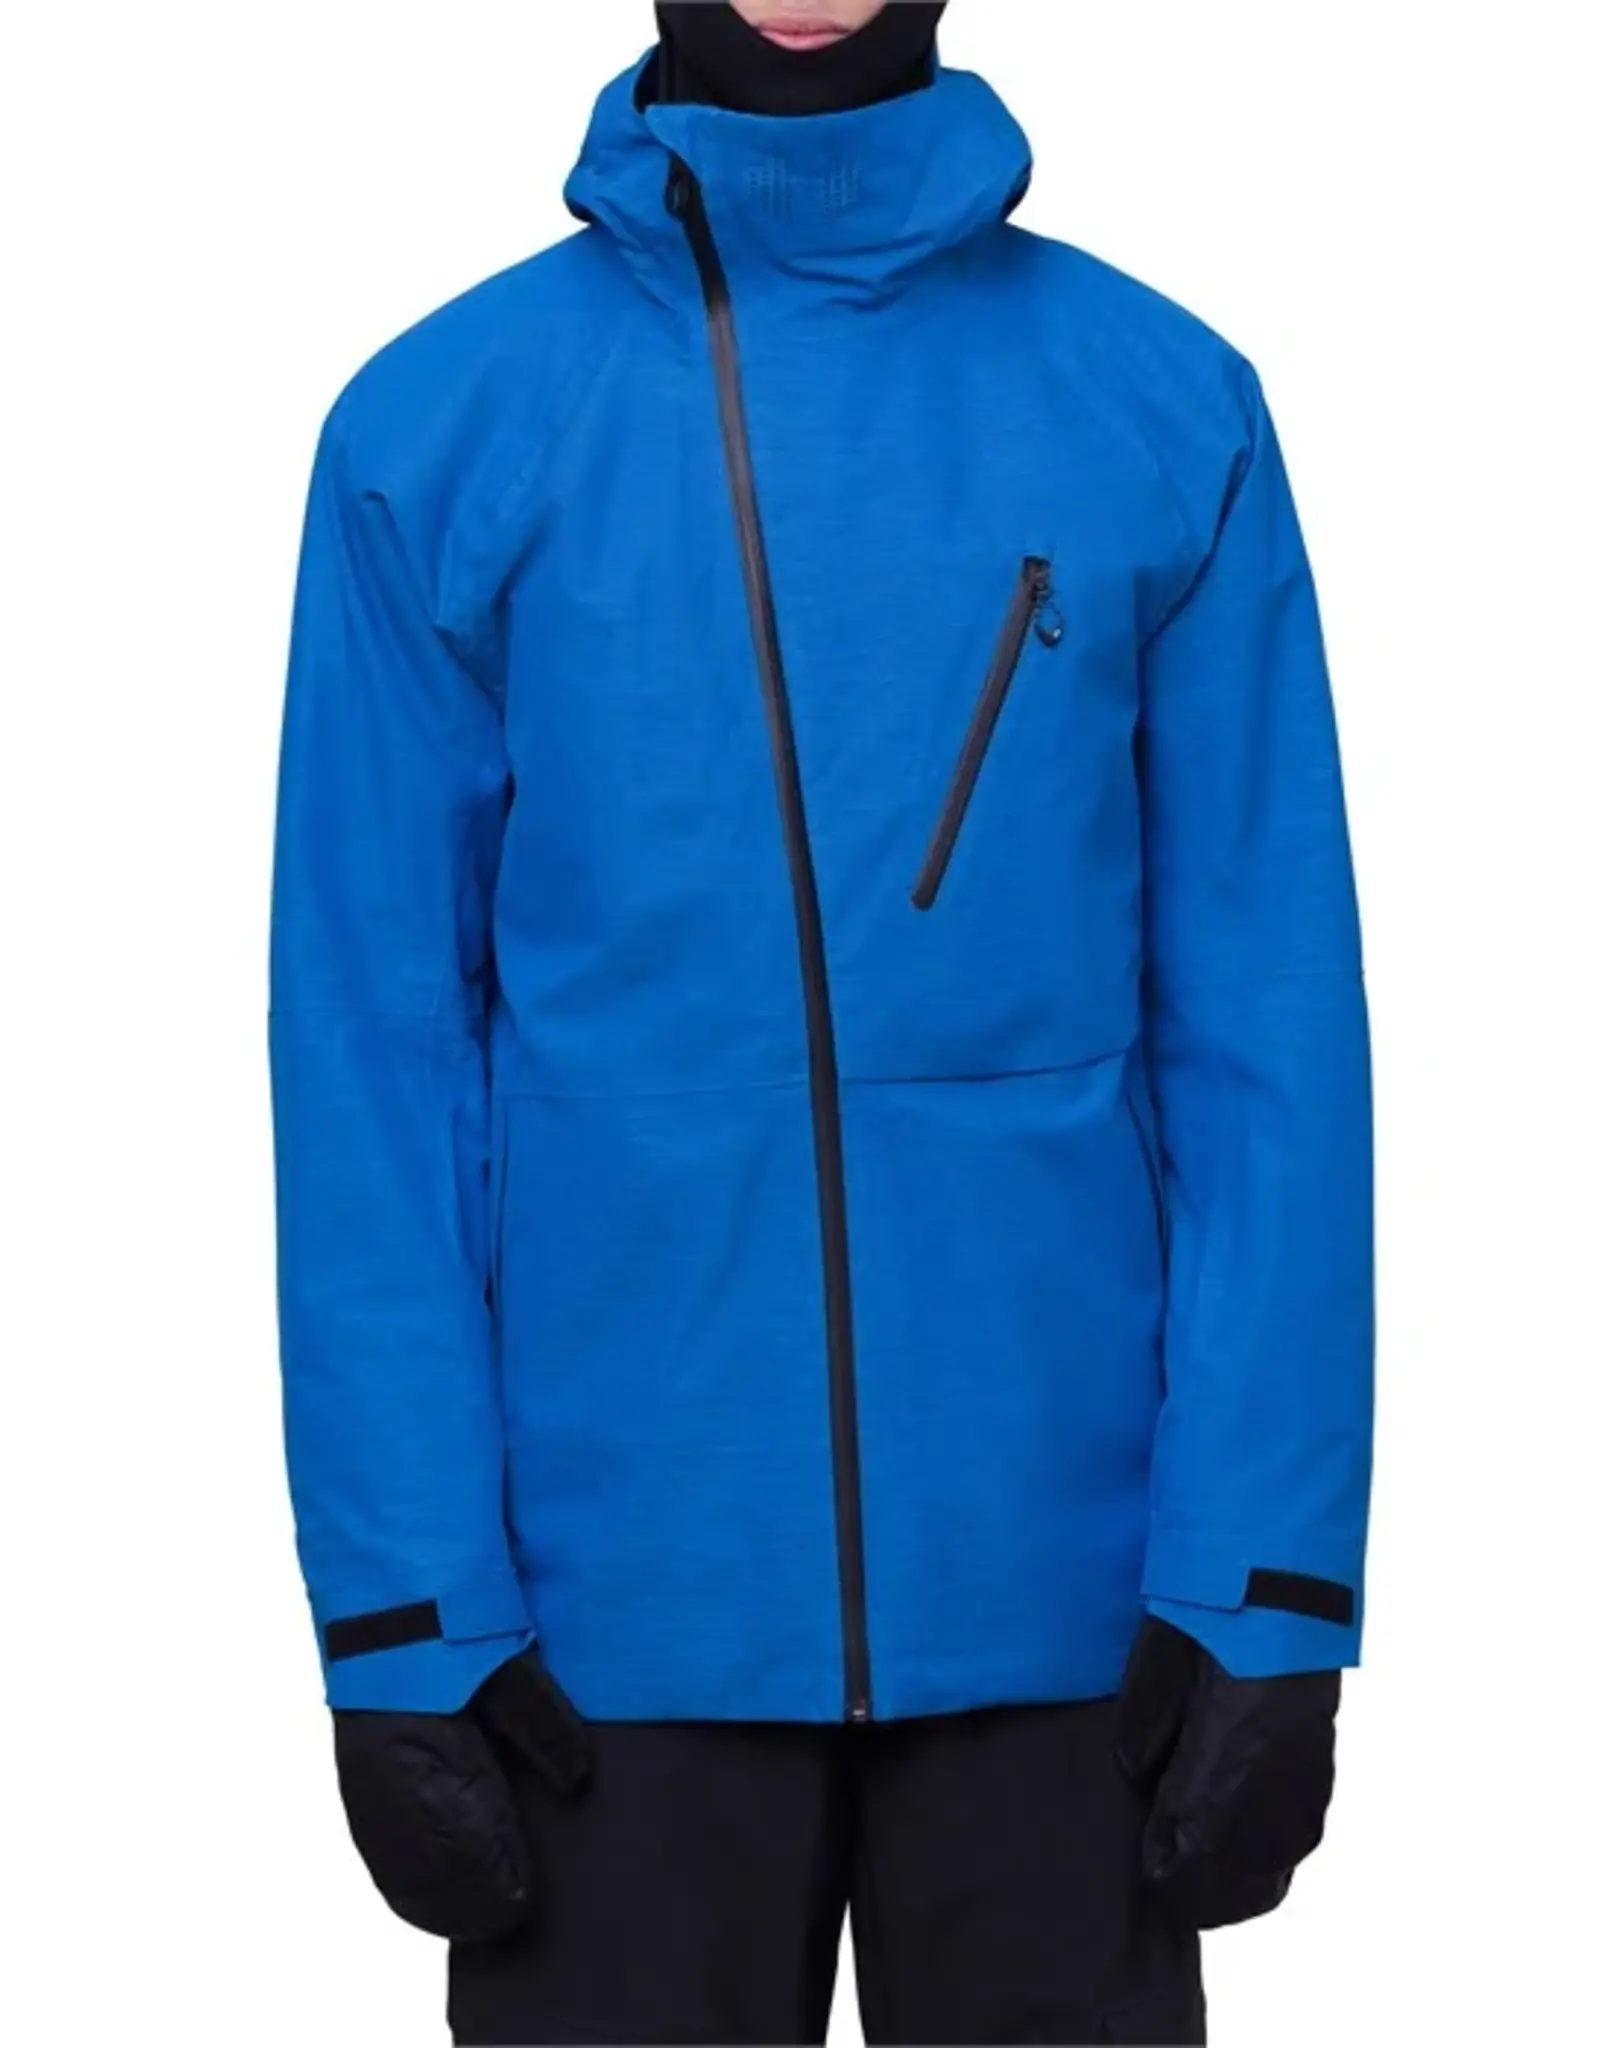 686 OUTERWEAR 686 - MENS HYDRA THERMAGRAPH  BLUE SLUSH HTR